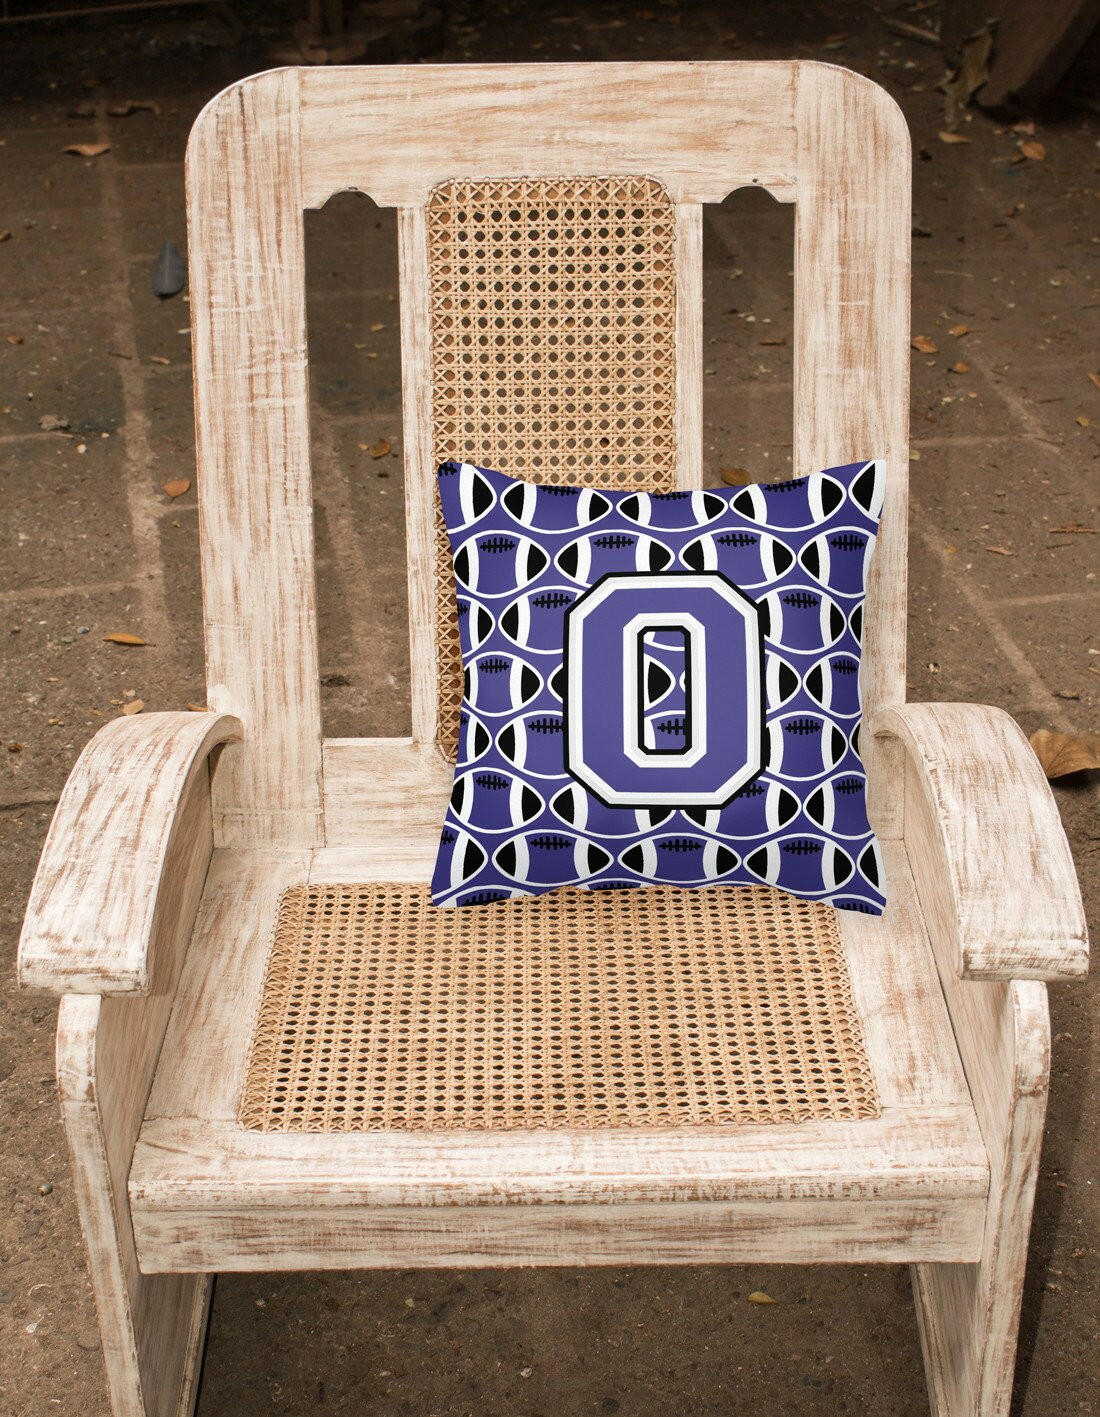 Letter O Football Purple and White Fabric Decorative Pillow CJ1068-OPW1414 by Caroline's Treasures